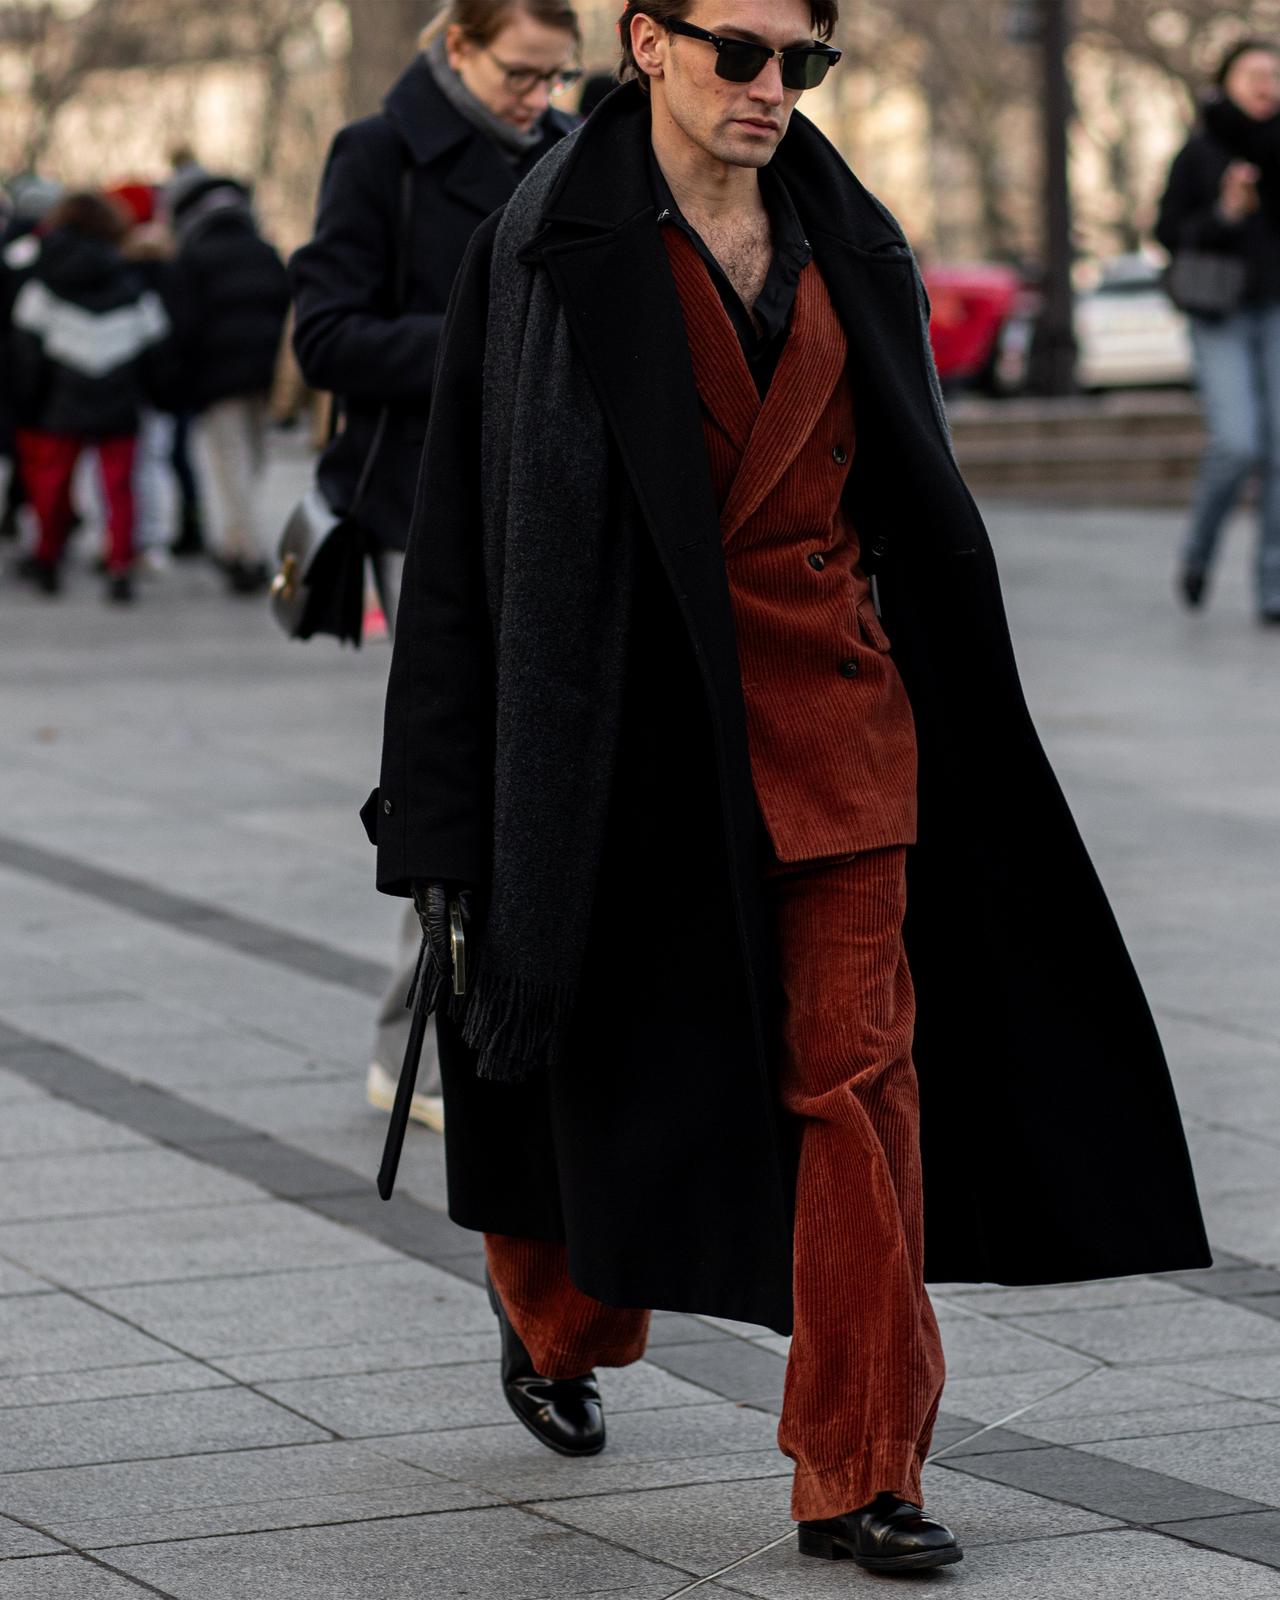 A man in a red suit and black coat walking down a street